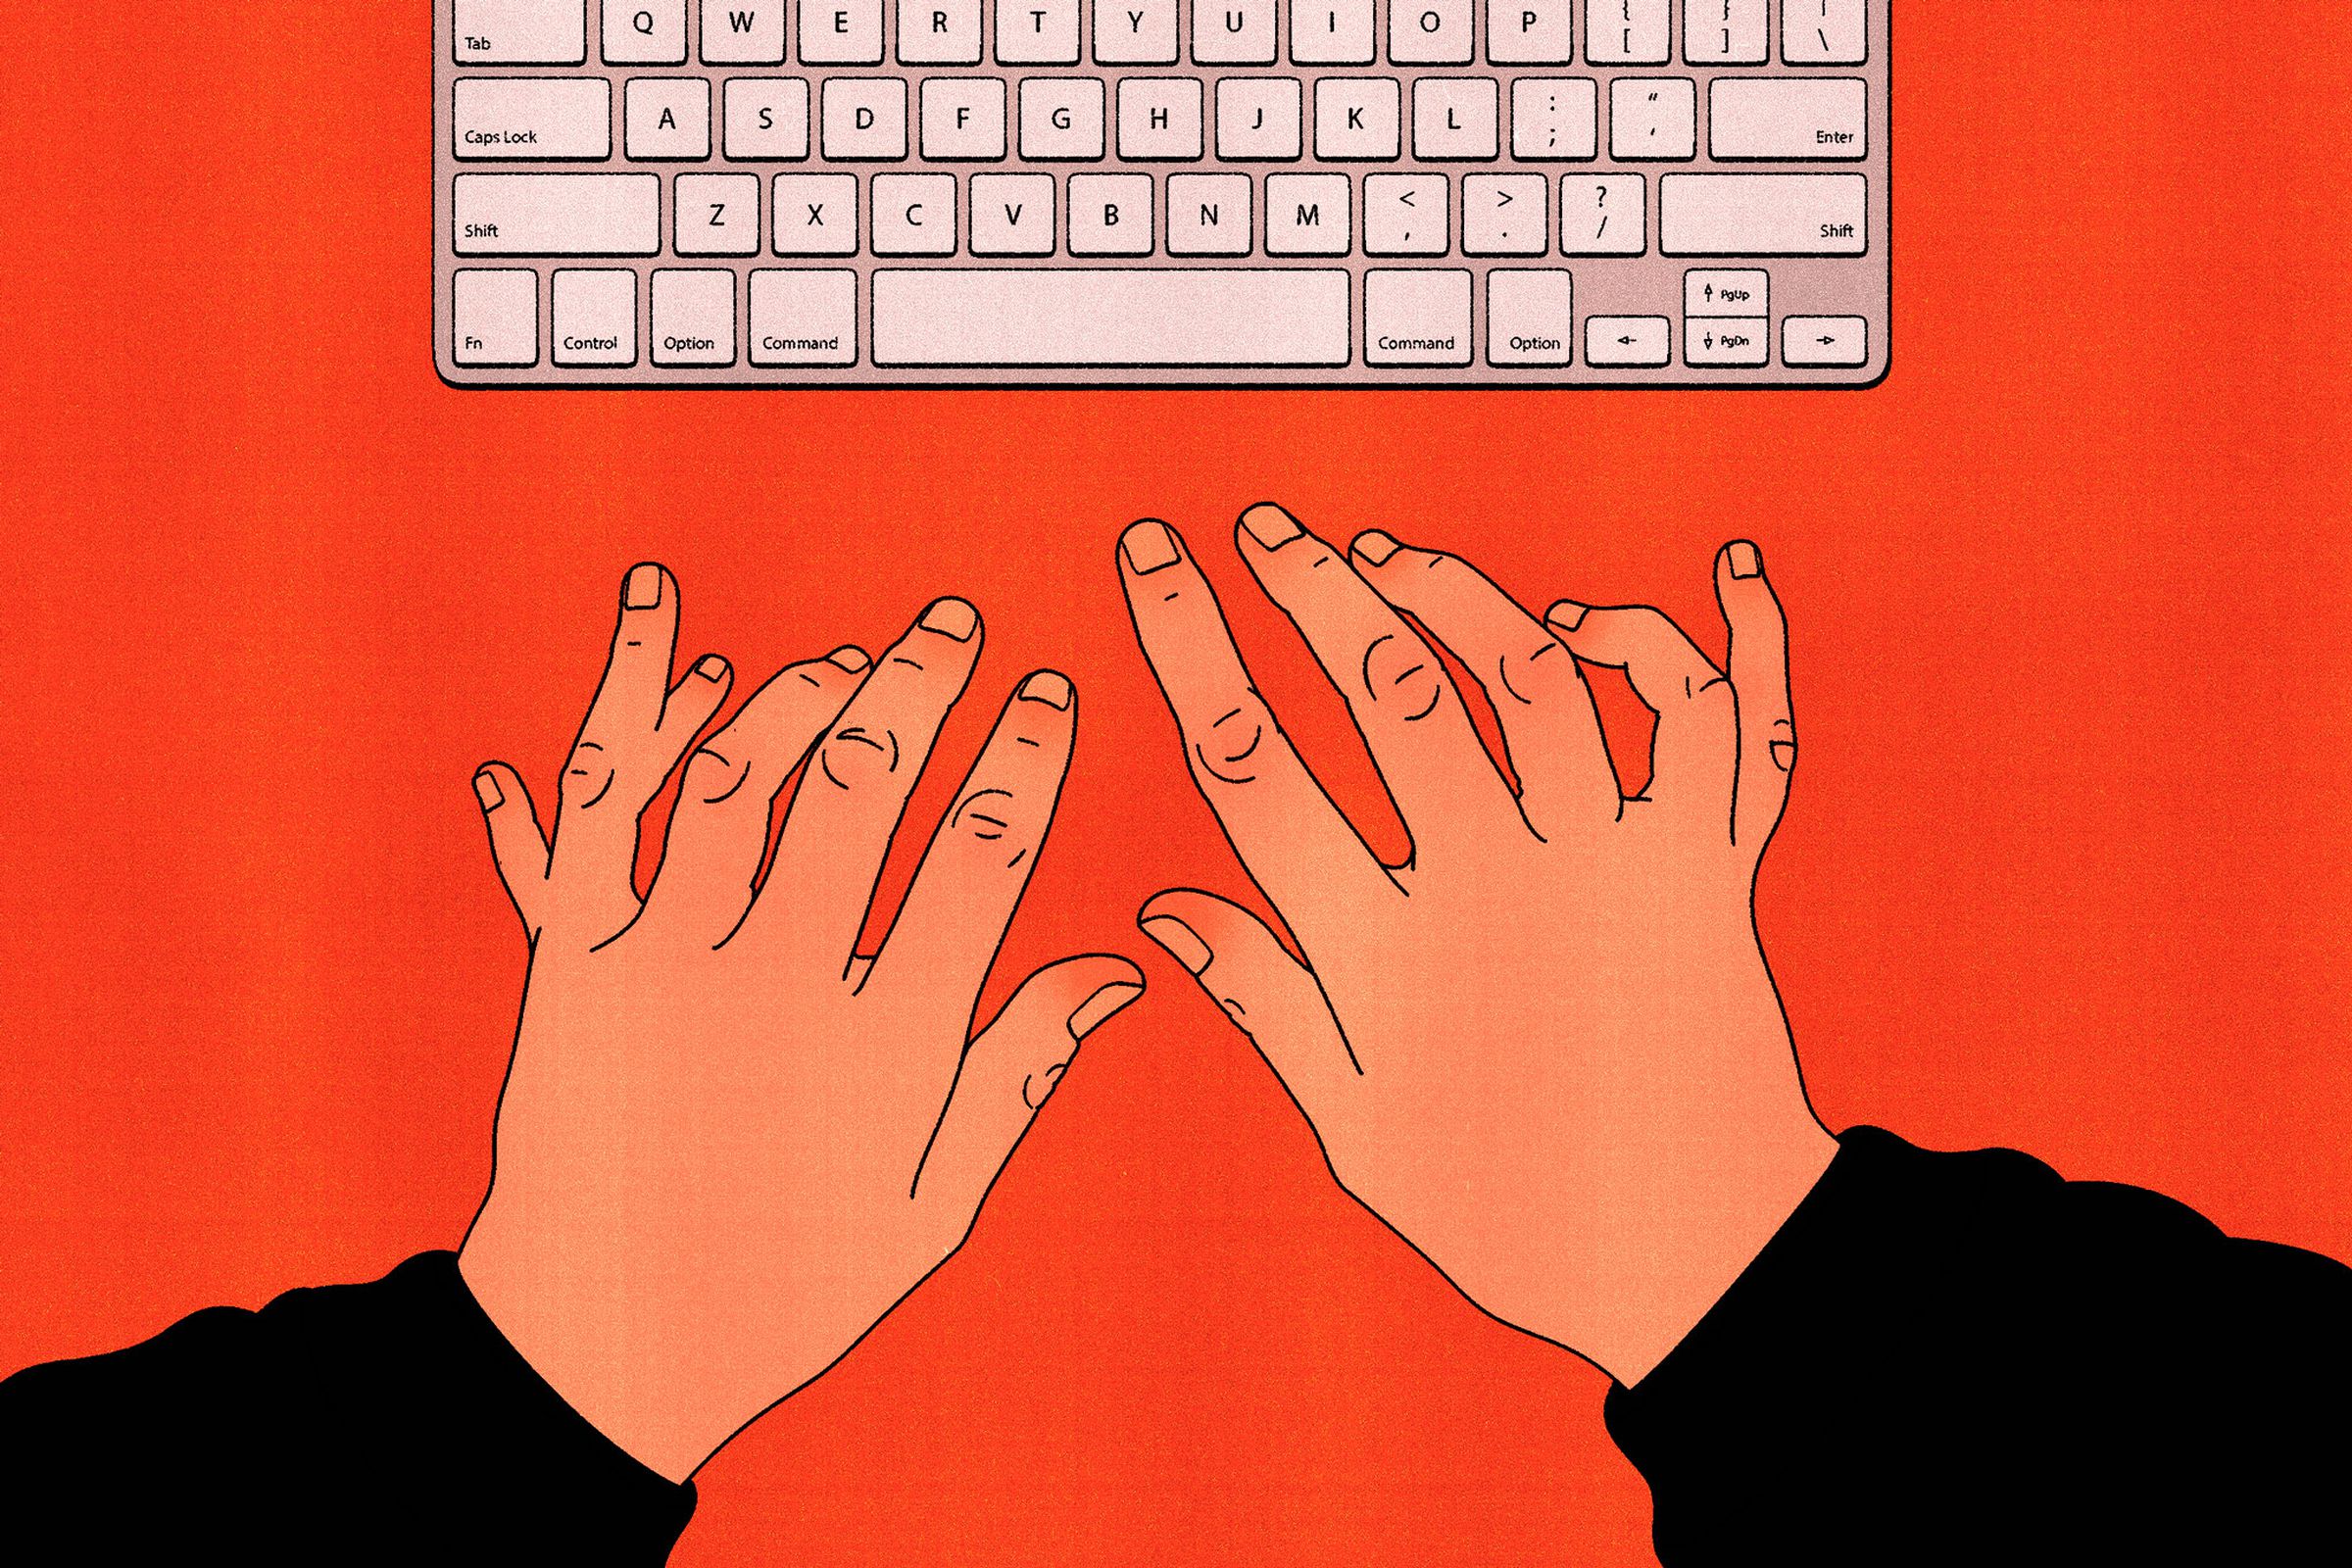 Illustration of hands and a keyboard